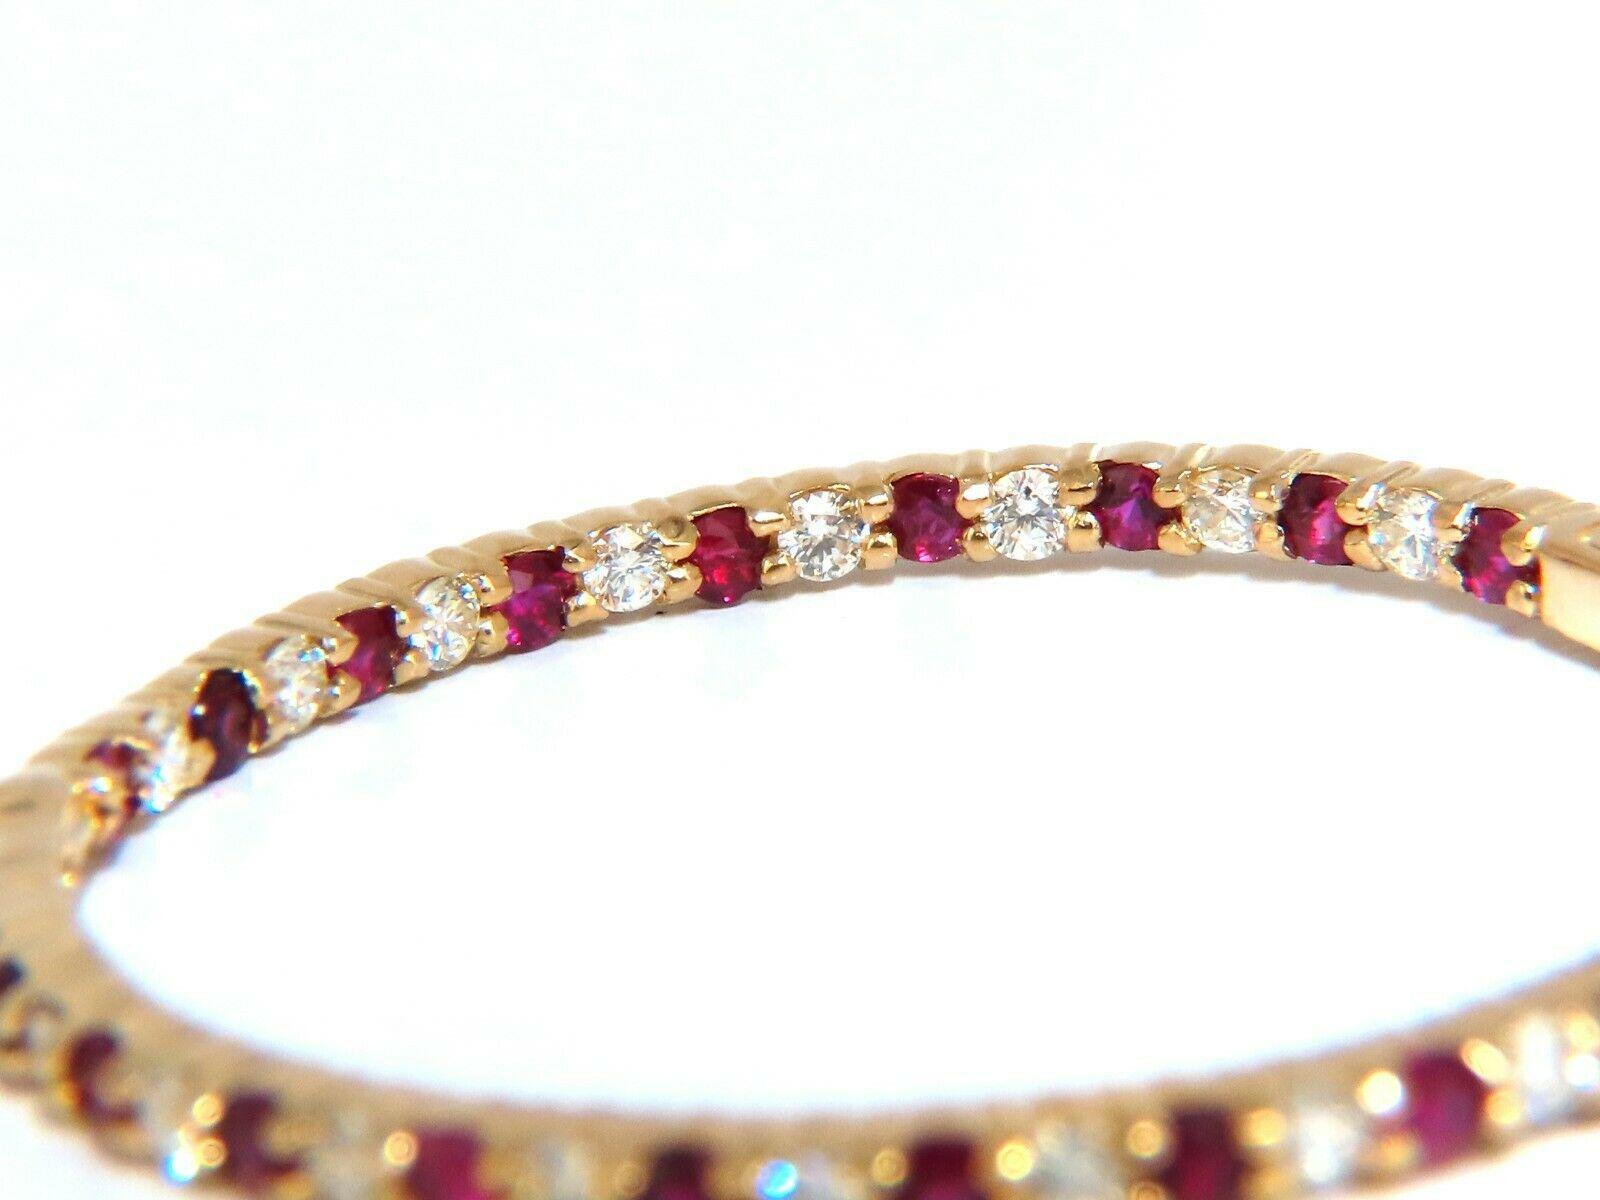 4.80ct Natural Ruby Diamonds Hoop Earrings 14kt Yellow Gold Inside Out For Sale 1